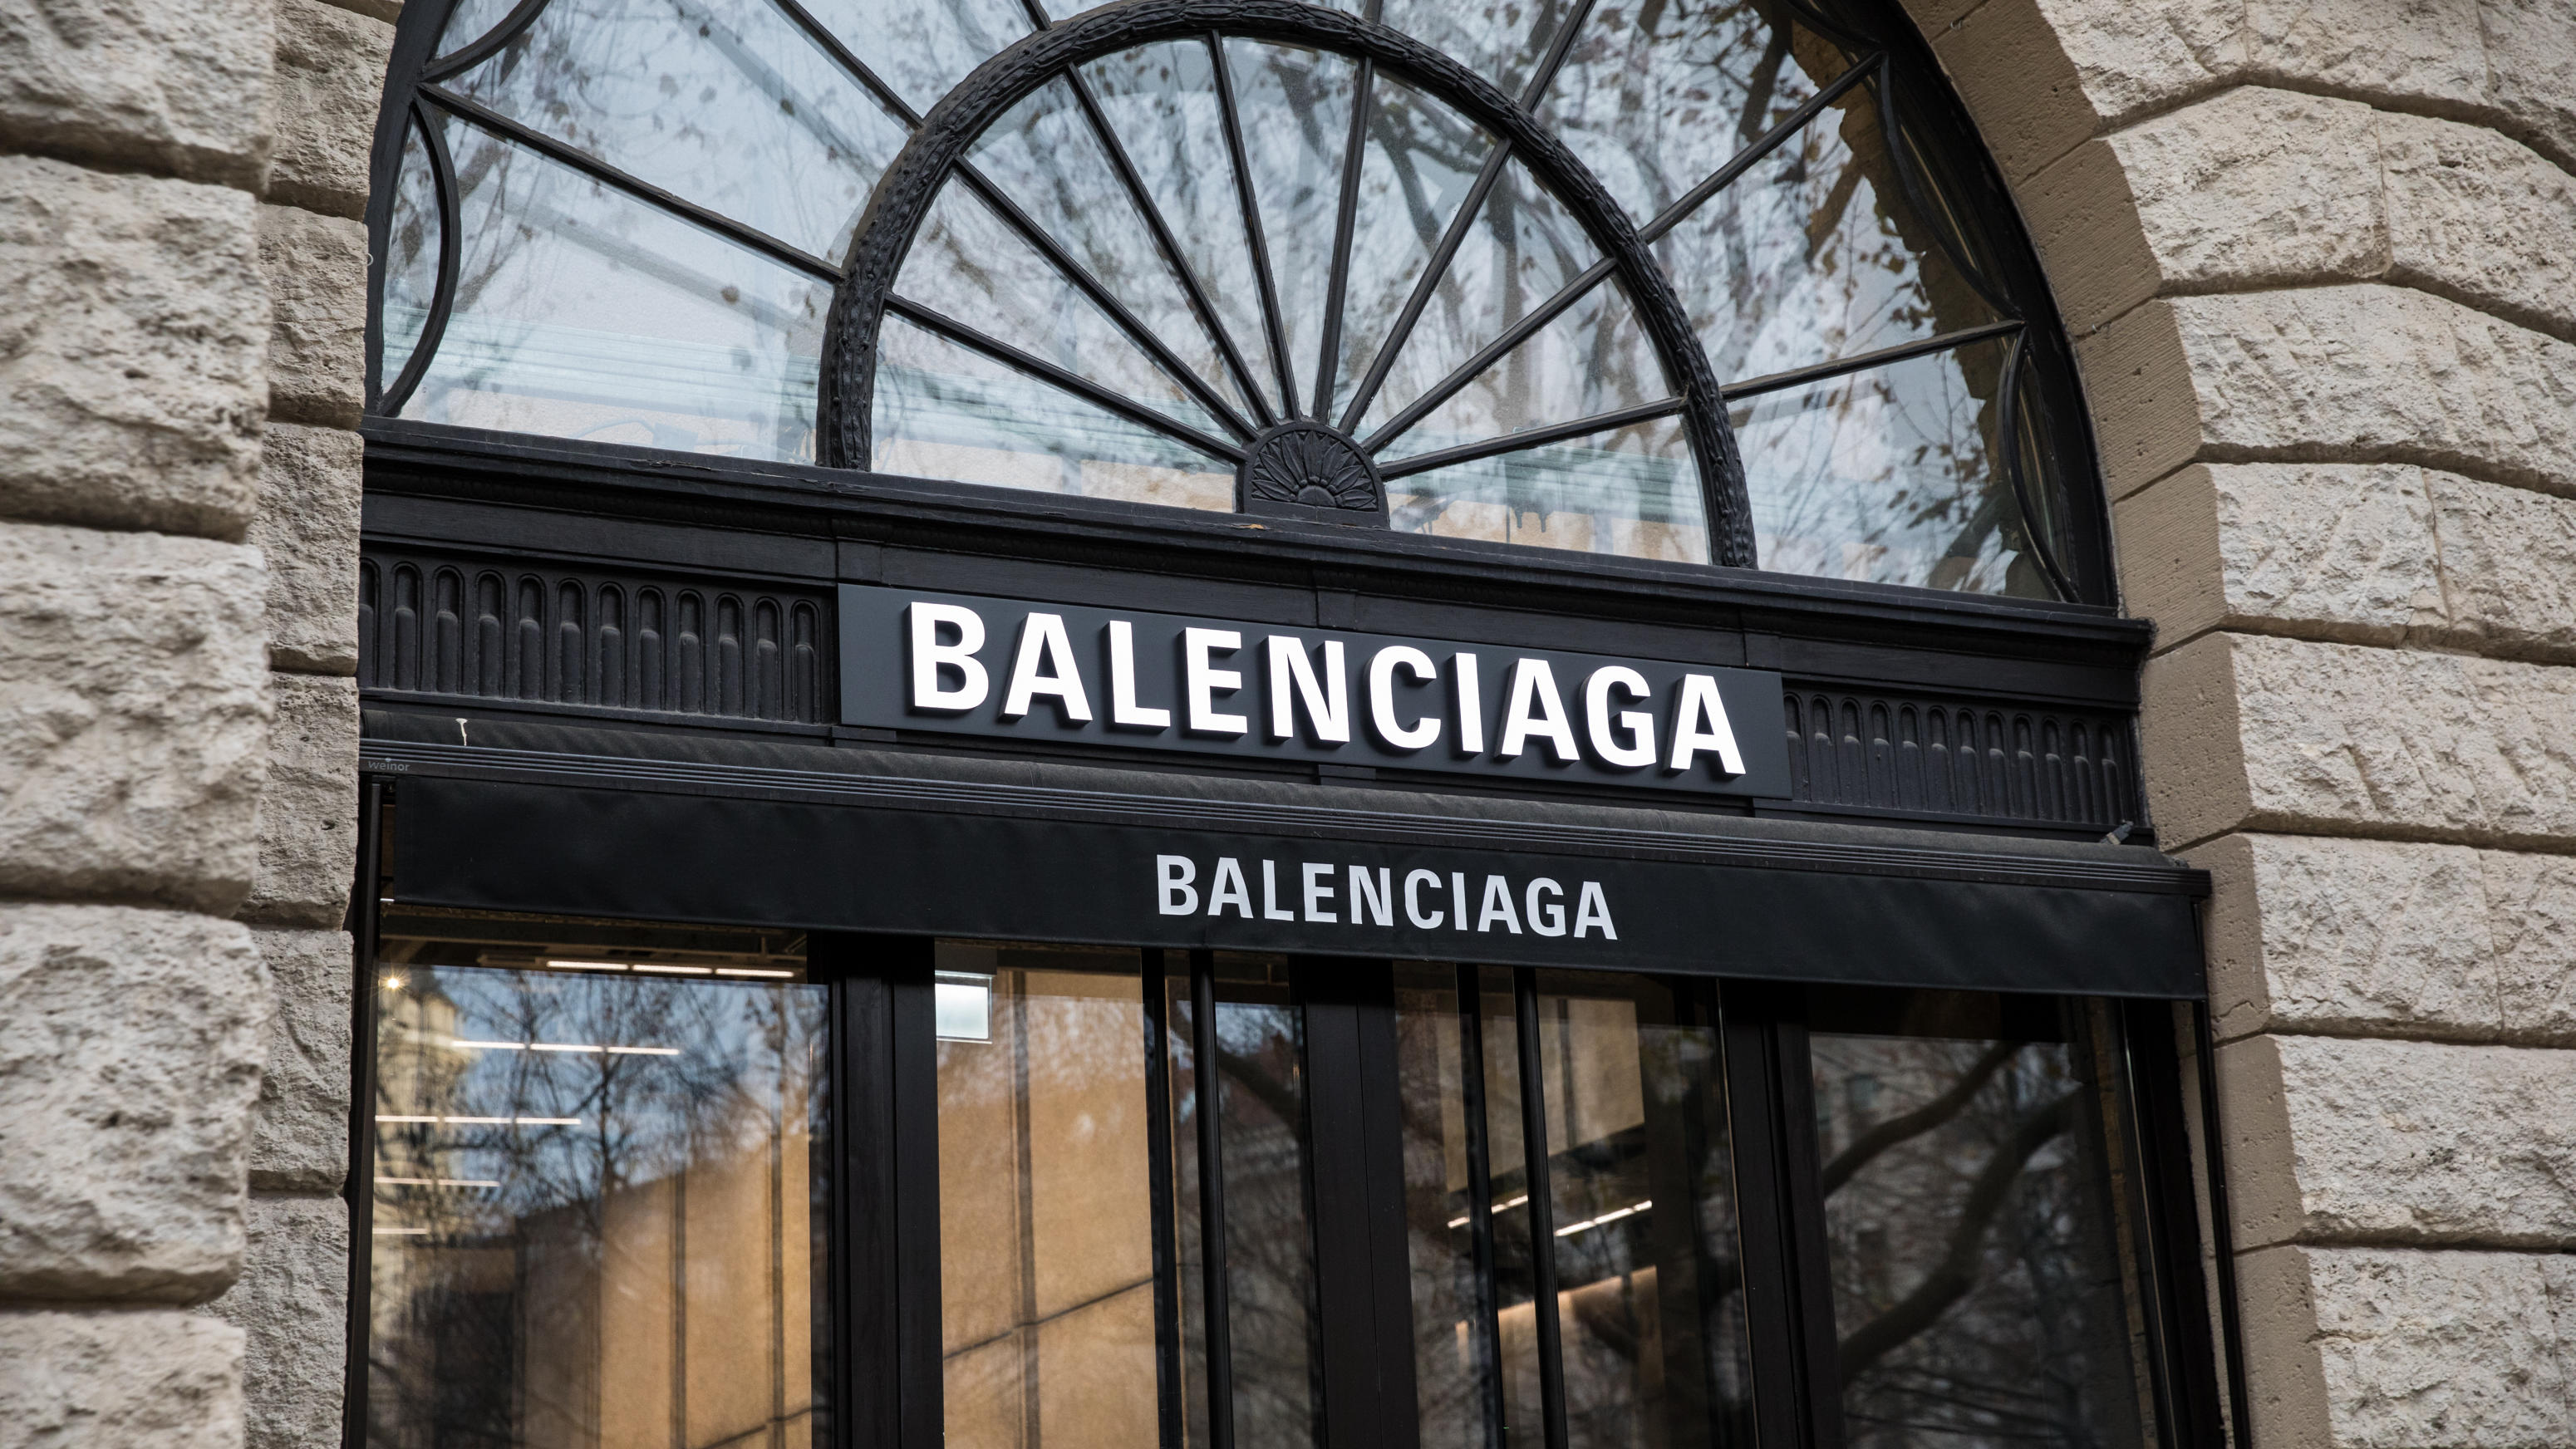 November 24, 2022, Berlin, Germany: Storefront of a Balenciaga store in Berlin on November 24, 2022. The Spanish-French luxury fashion house Balenciaga is currently under criticism. The reason is the latest campaign, in which children were photograph